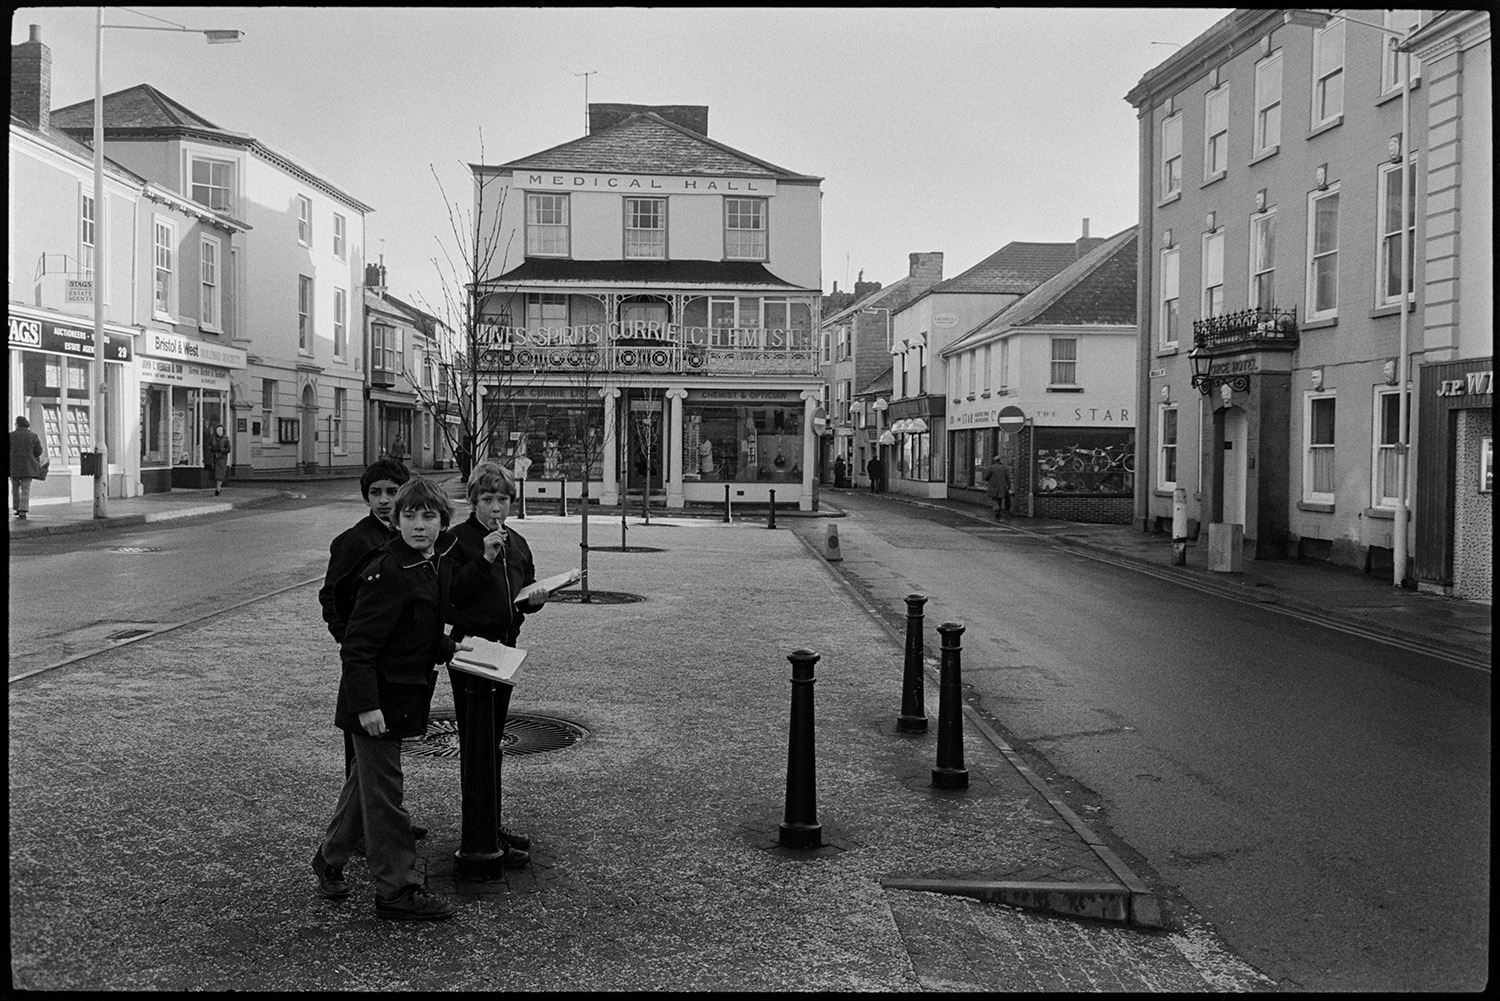 Schoolchildren doing project in town, chemist's shop behind.
[Street scene with three school children in the square in South Molton for a school project.  The George Hotel is visible on the right and the Medical Hall or Currie's Chemist can be seen in the background.]